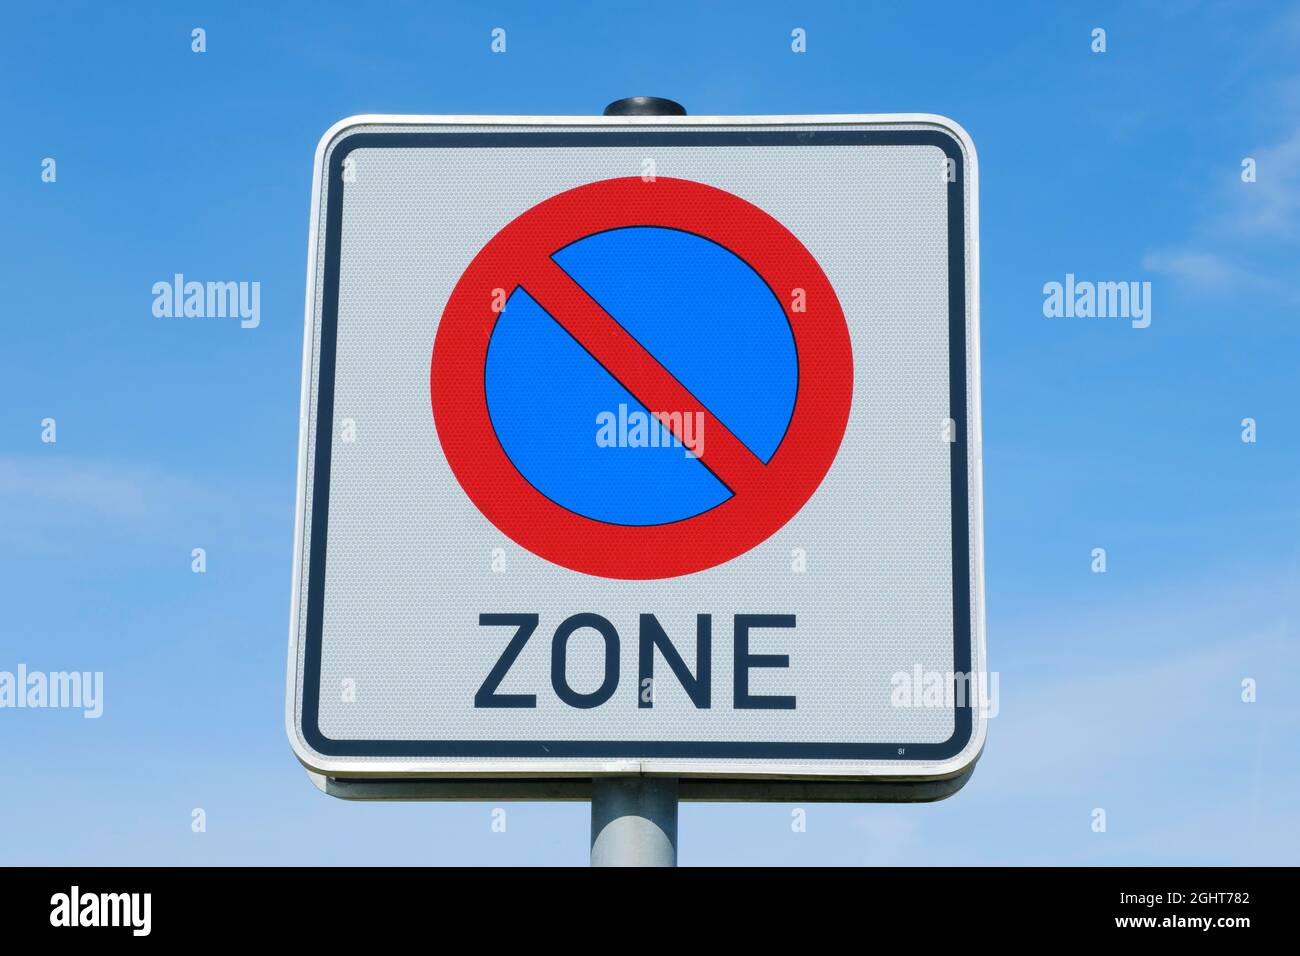 No stopping zone, traffic sign, Lower Saxony, Germany Stock Photo